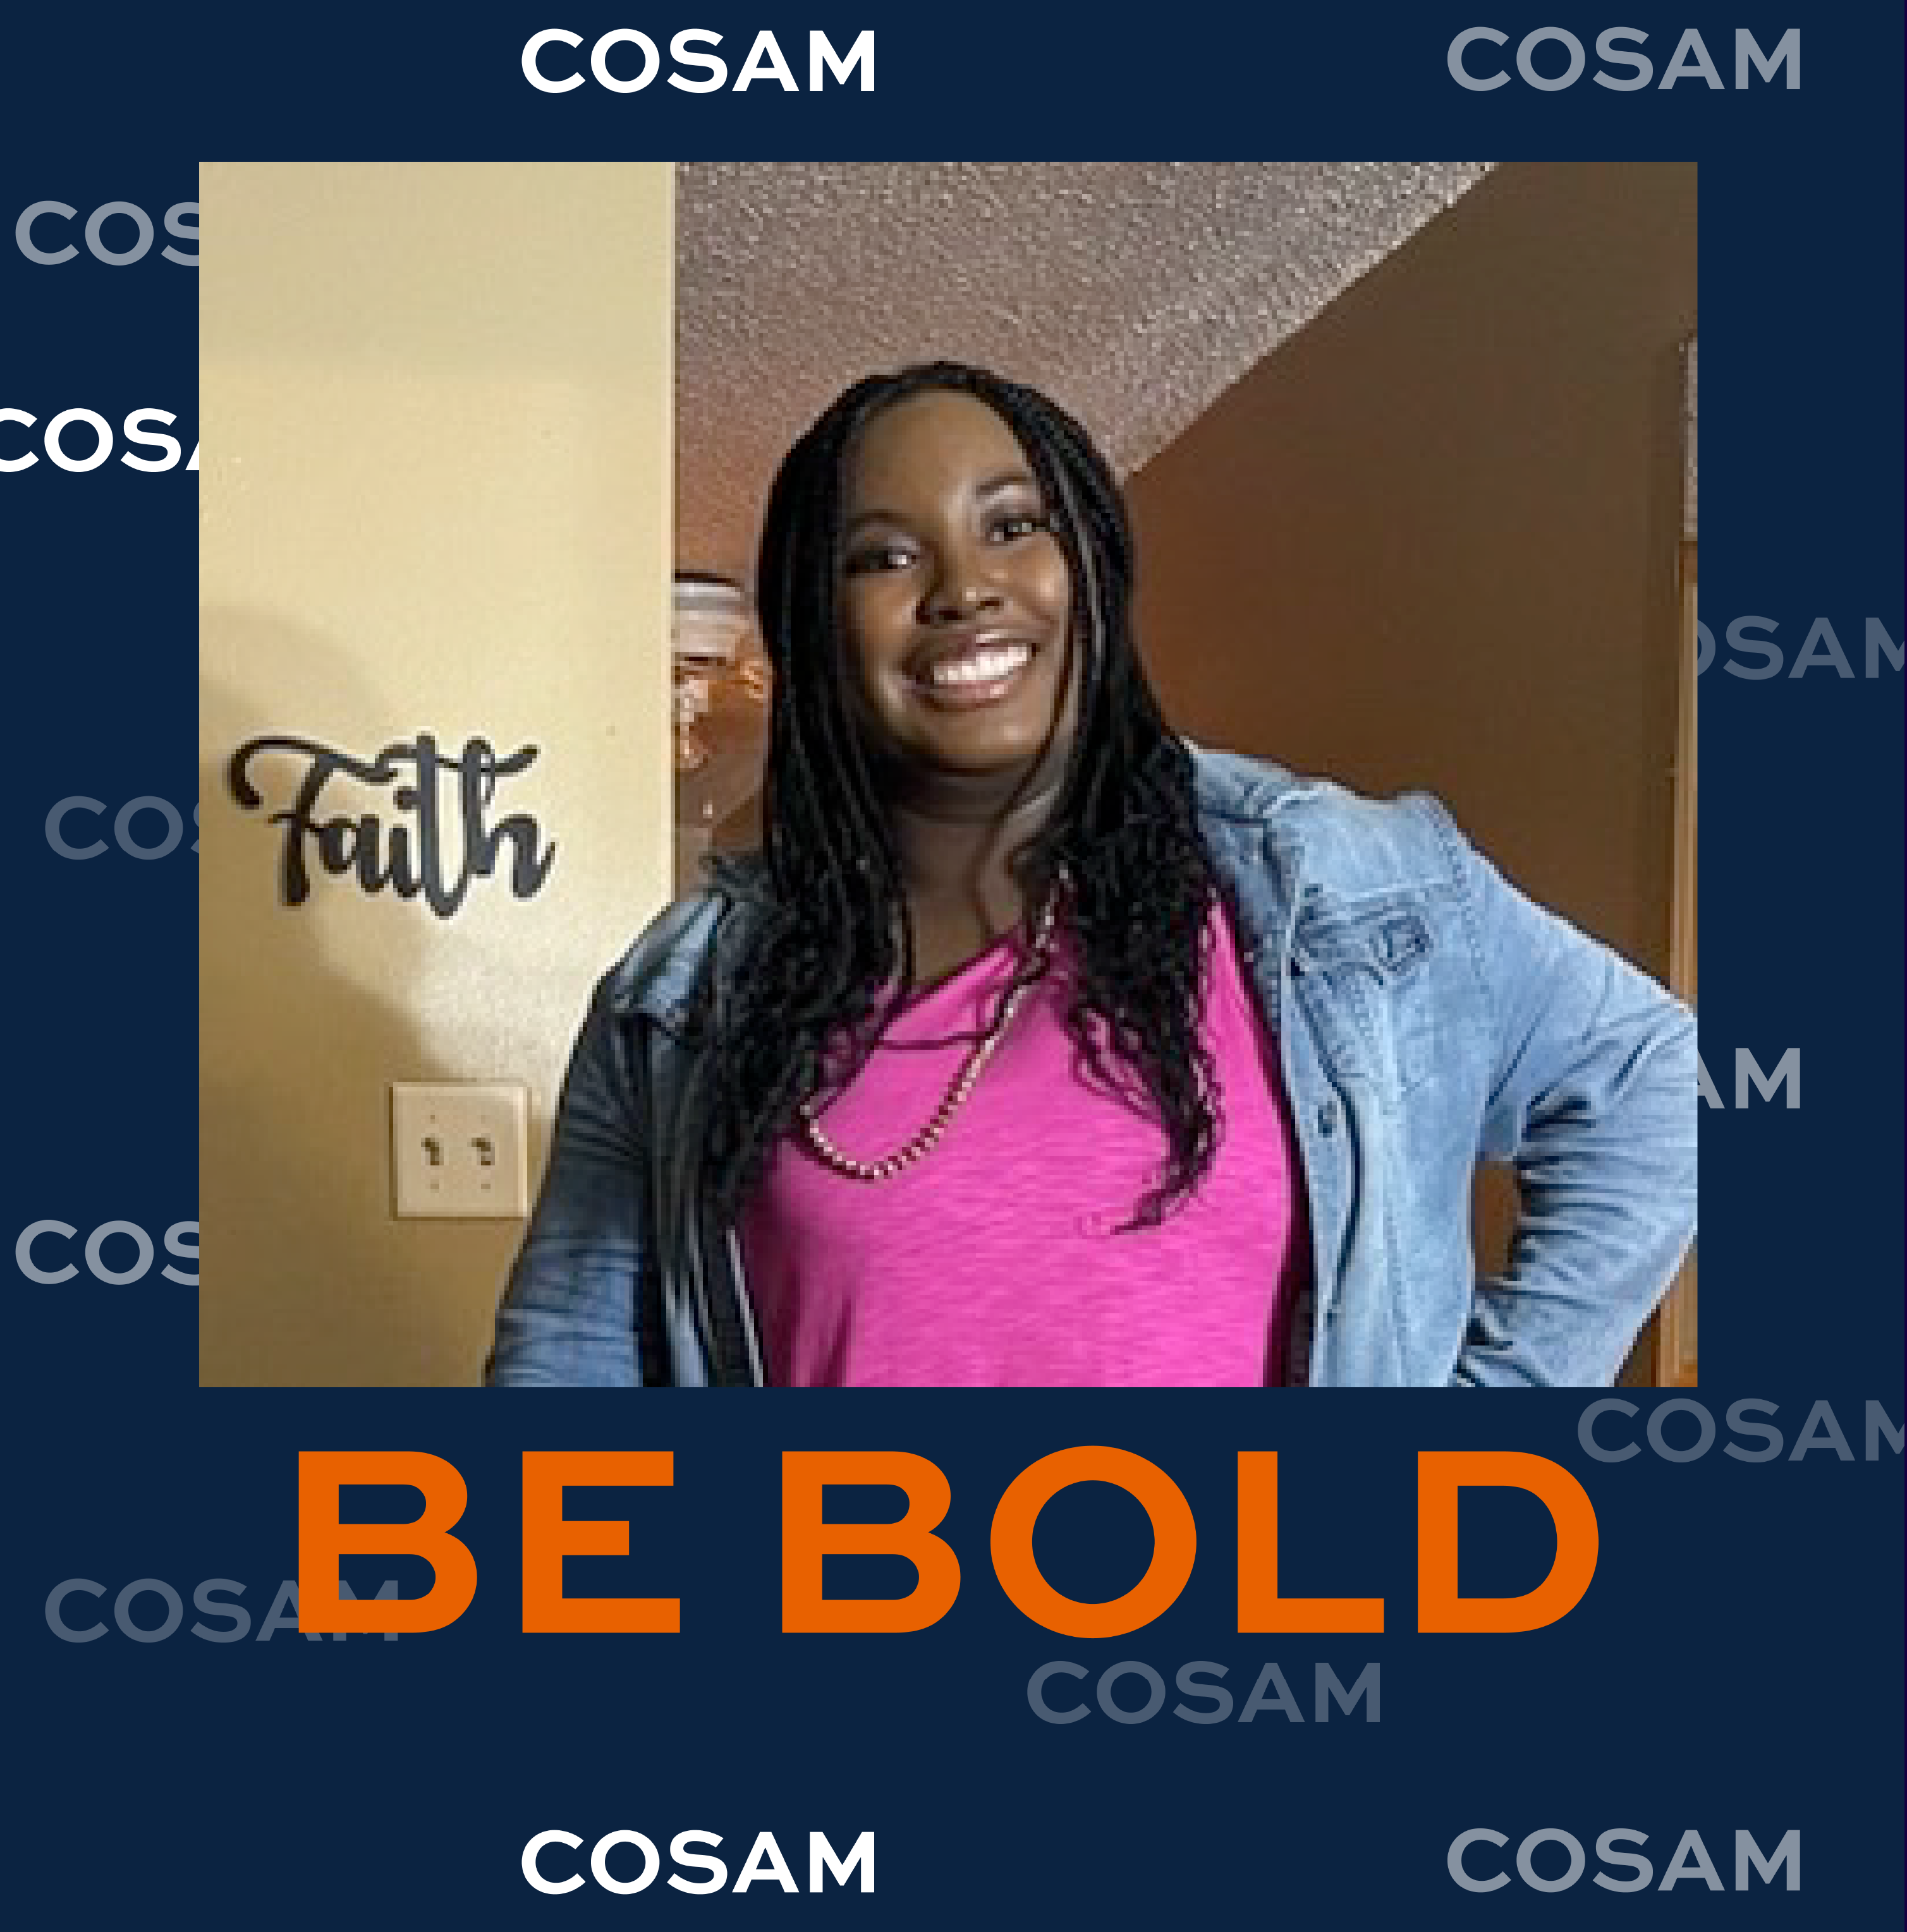 COSAM Graduation Marshal overcomes challenges to make her dad proud and give back to her community